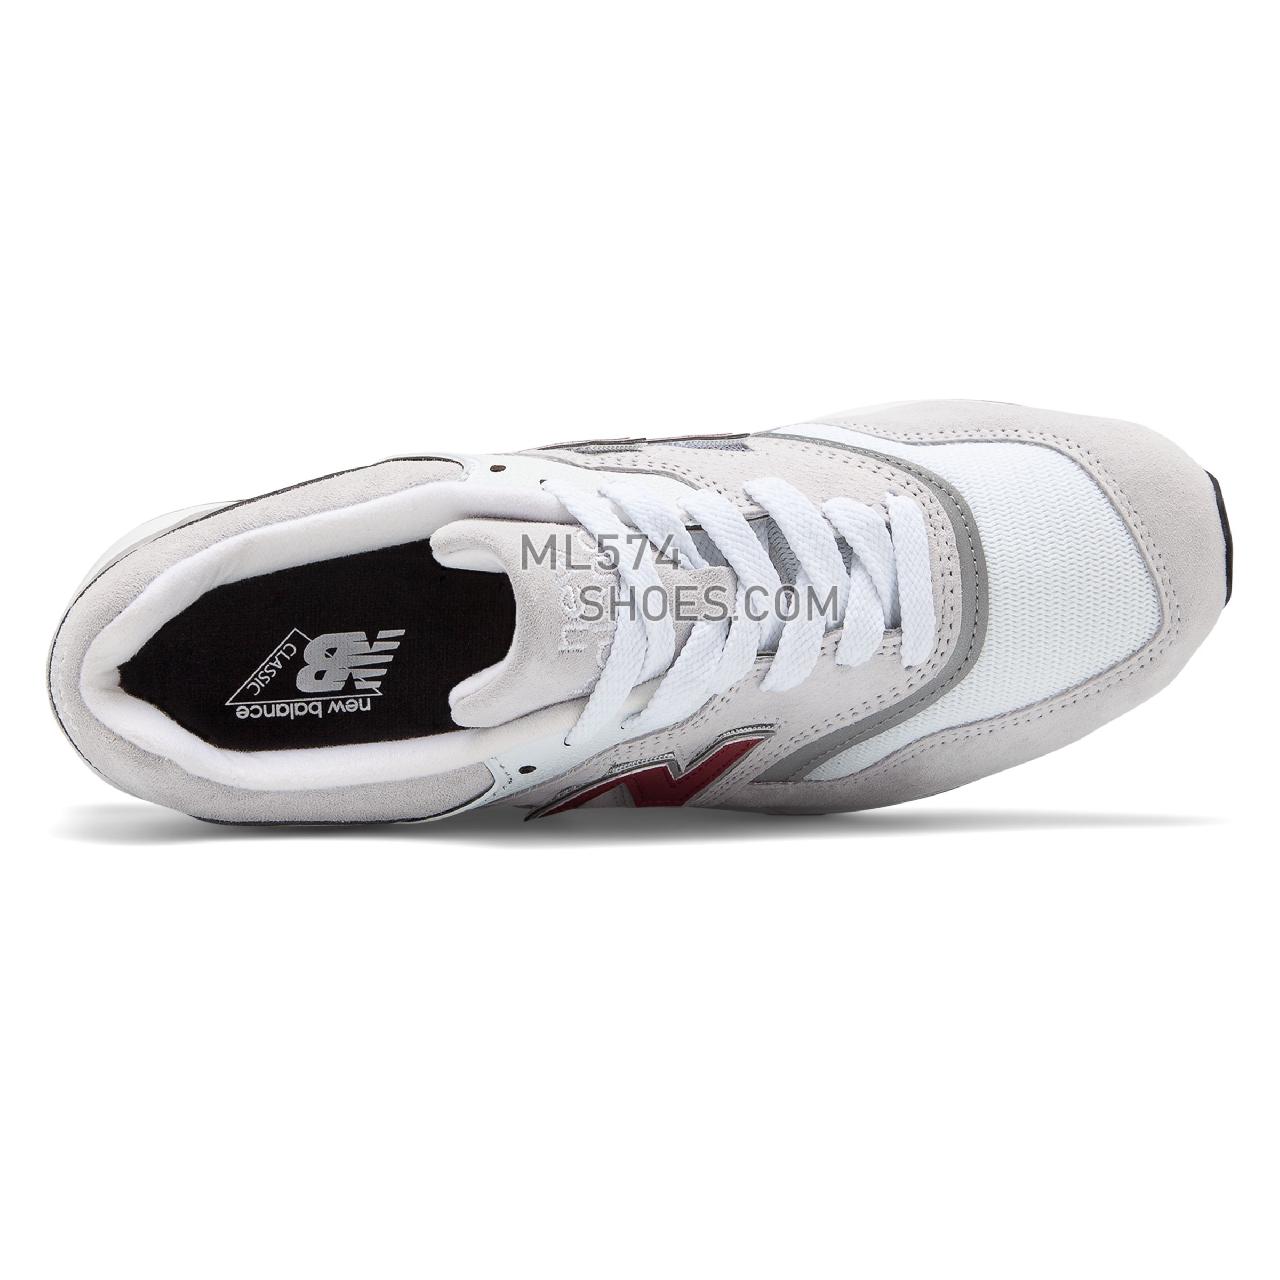 New Balance Made in US 997 - Men's Made in US 997 - White with Silver - M997LBG